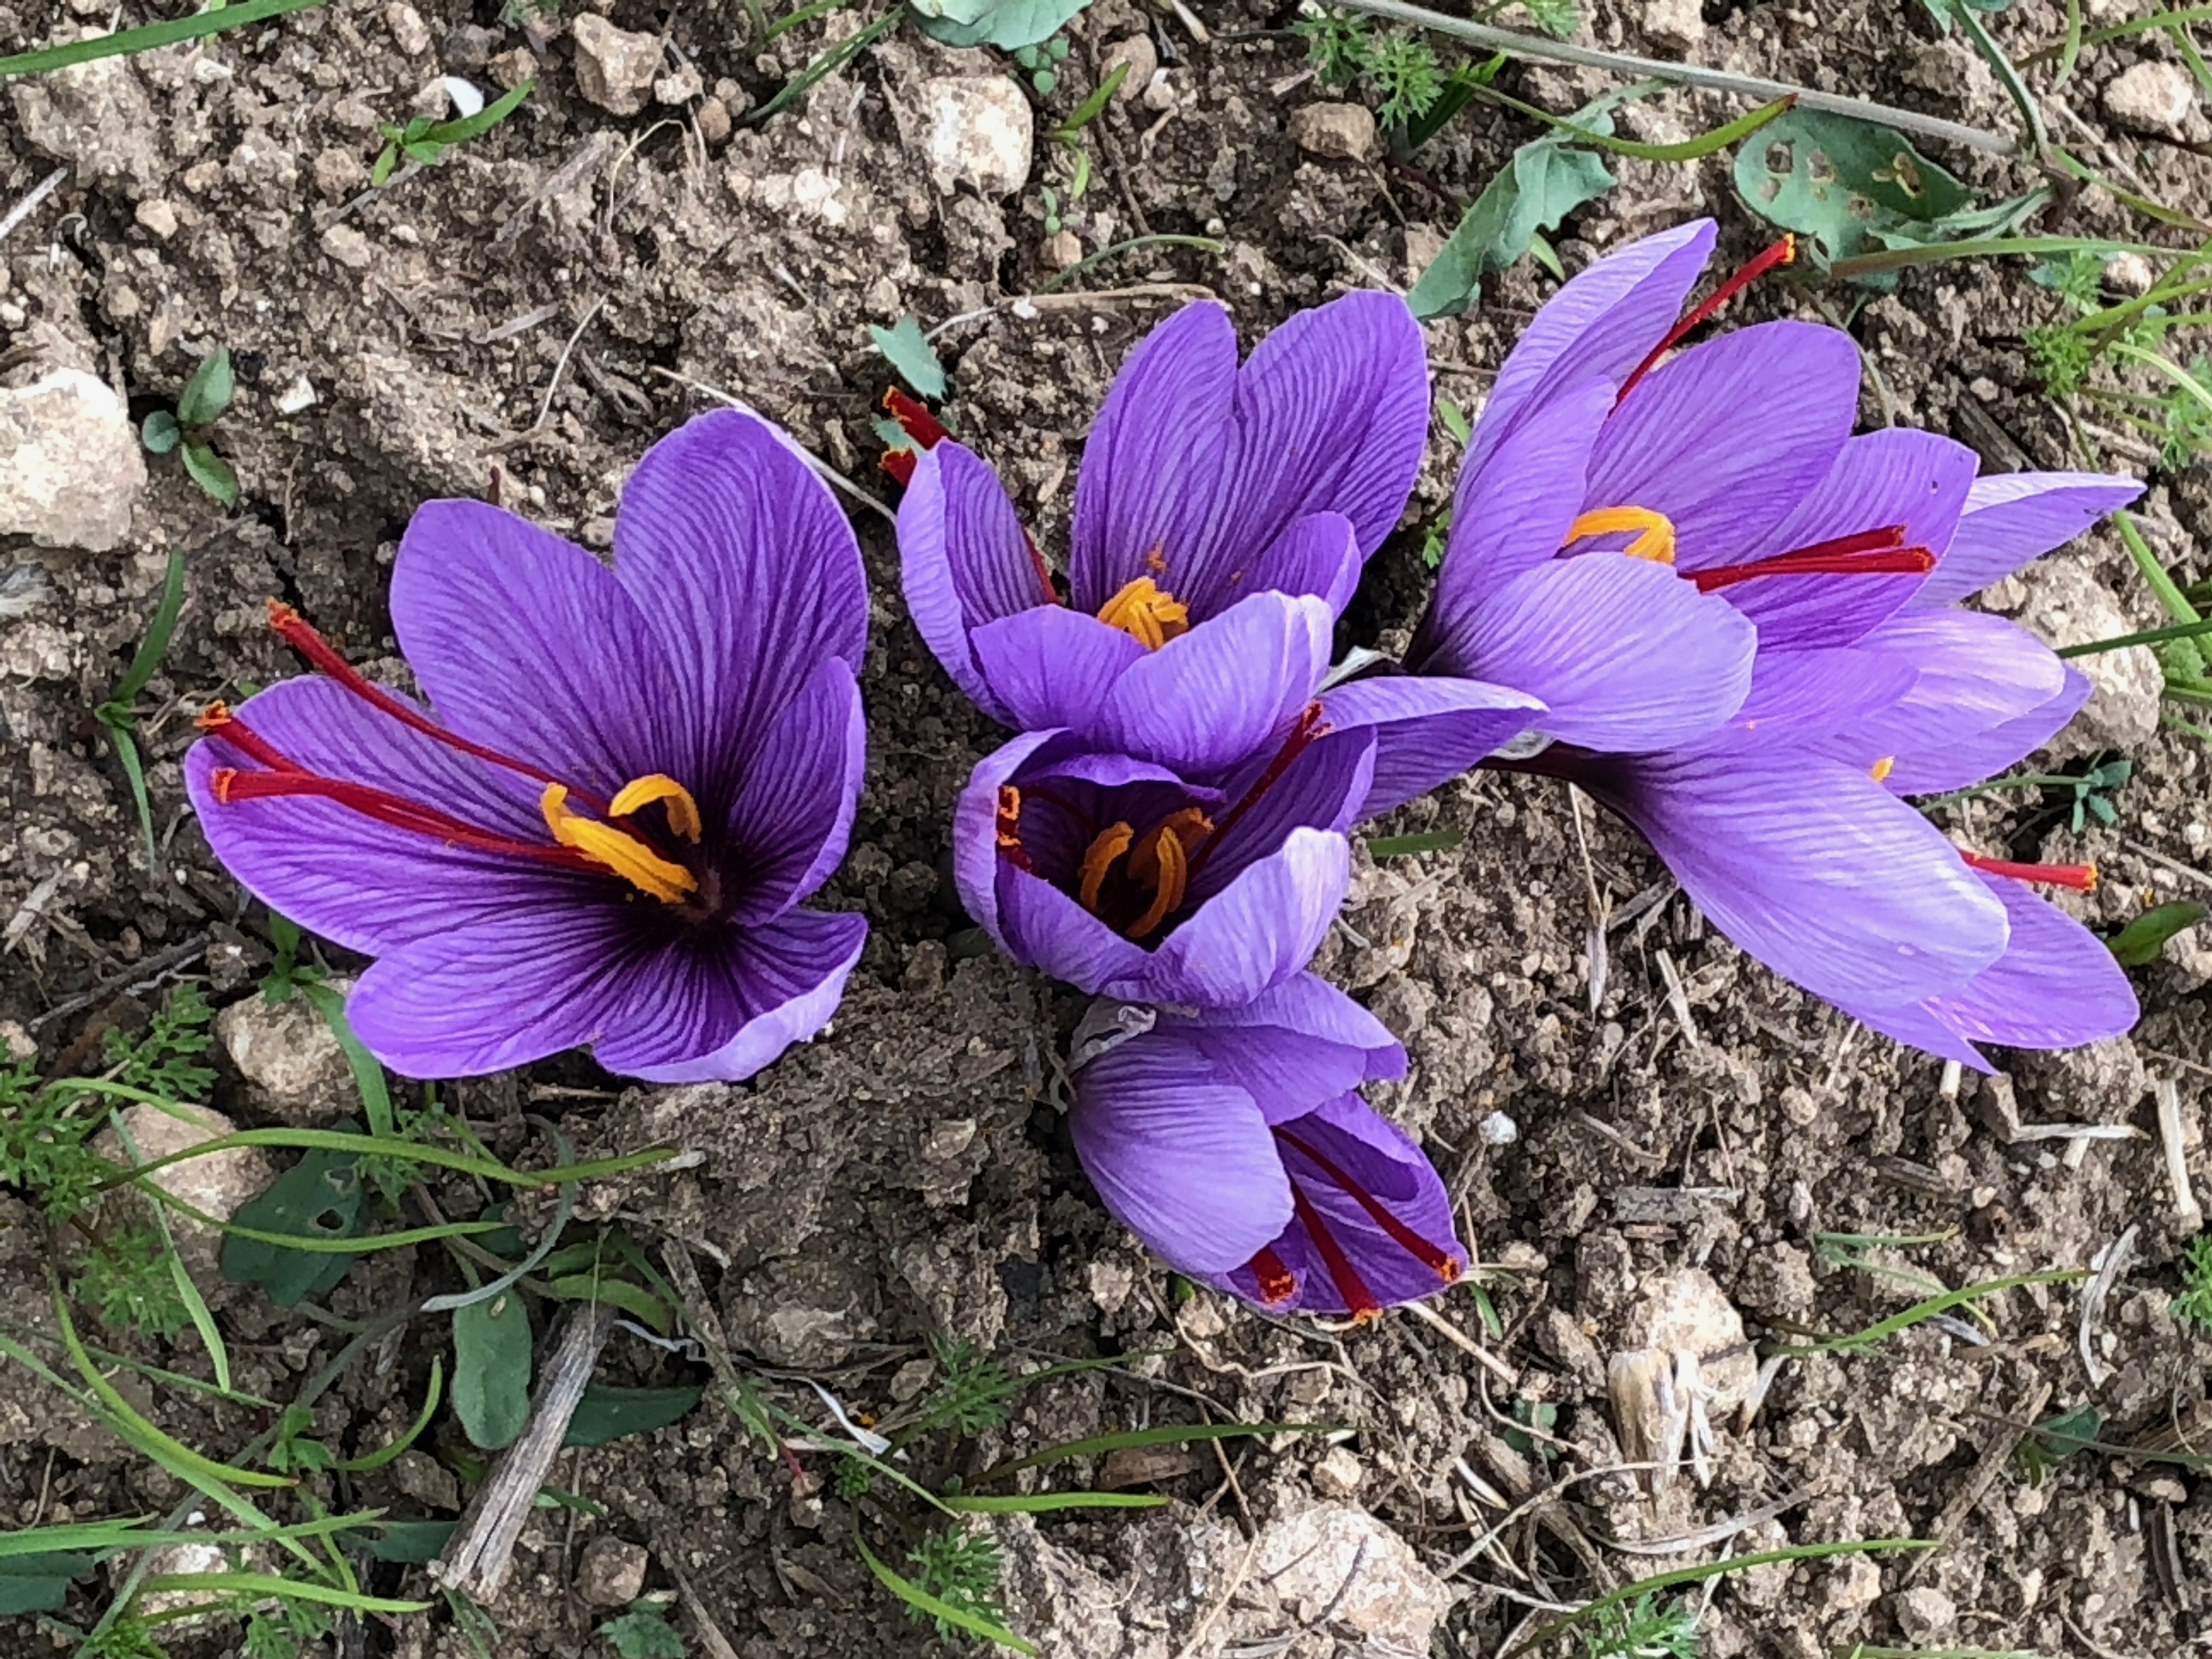 A clump of perfect flowers of Crocus sativus, showing the valuable red stigma and styles.